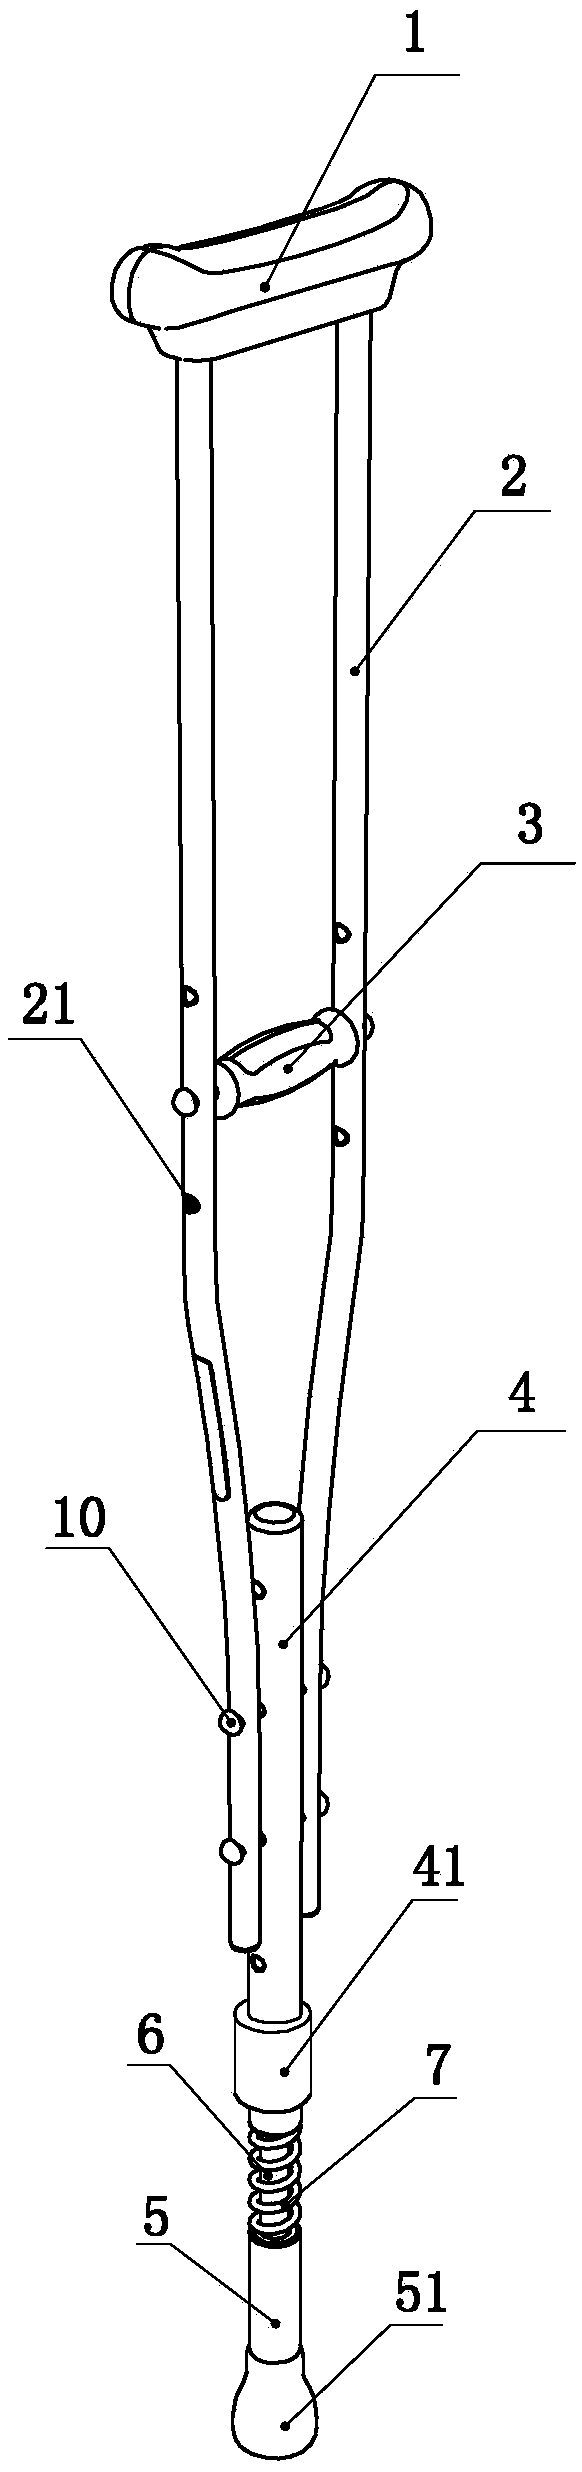 Underarm crutch with power generation function